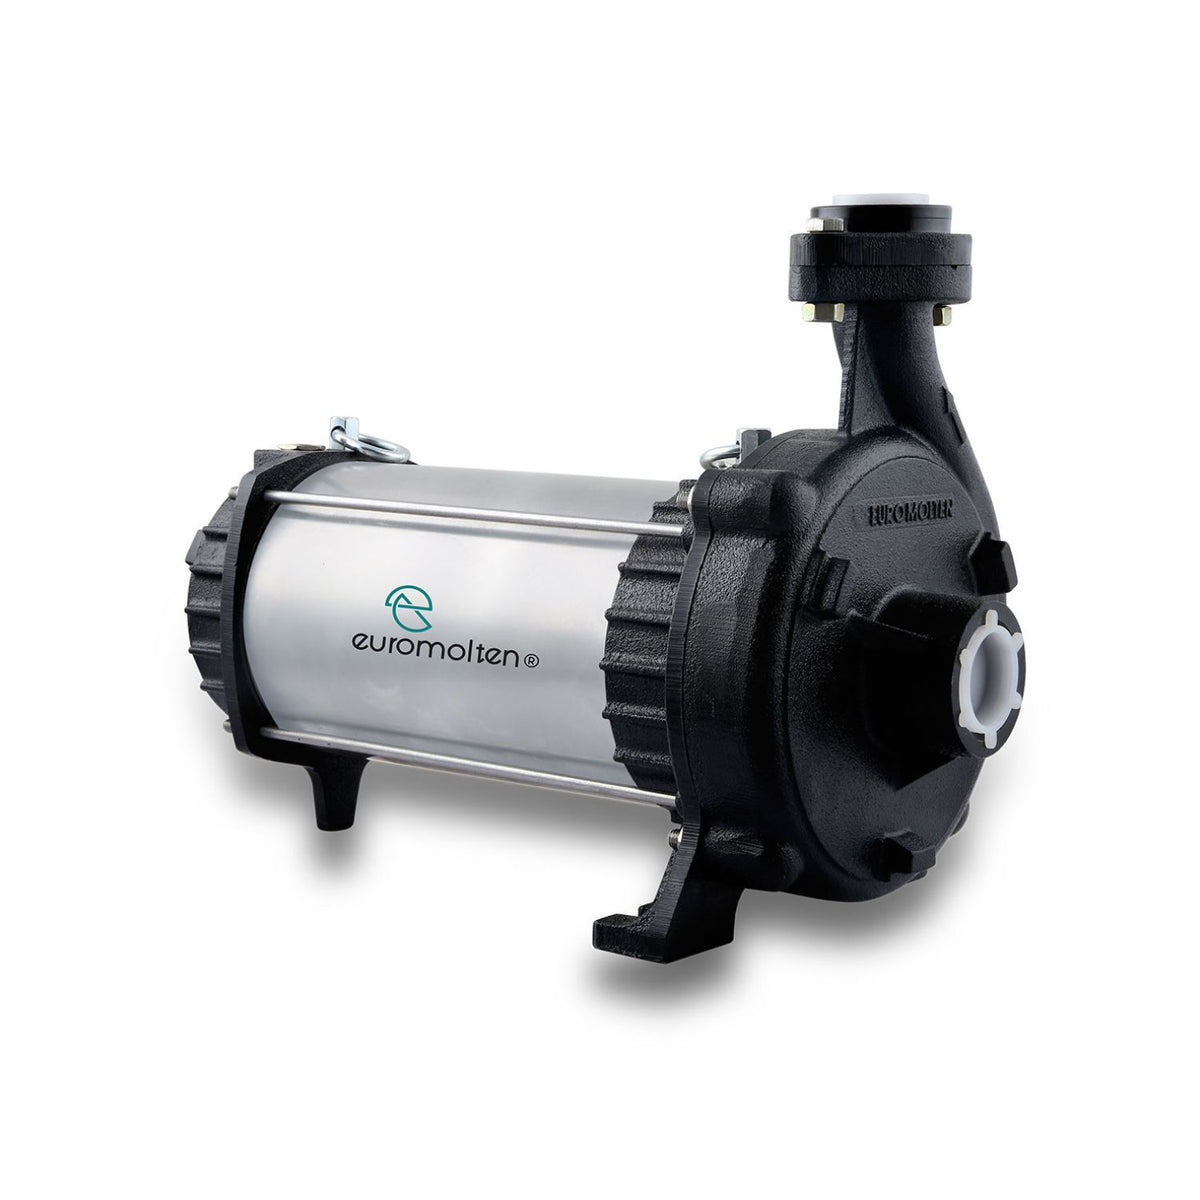 EUROMOLTEN 1.5 HP Openwell Submersible Pumps, Equipped with Dual Carbon  Bush Technology, Works upto 120 feet